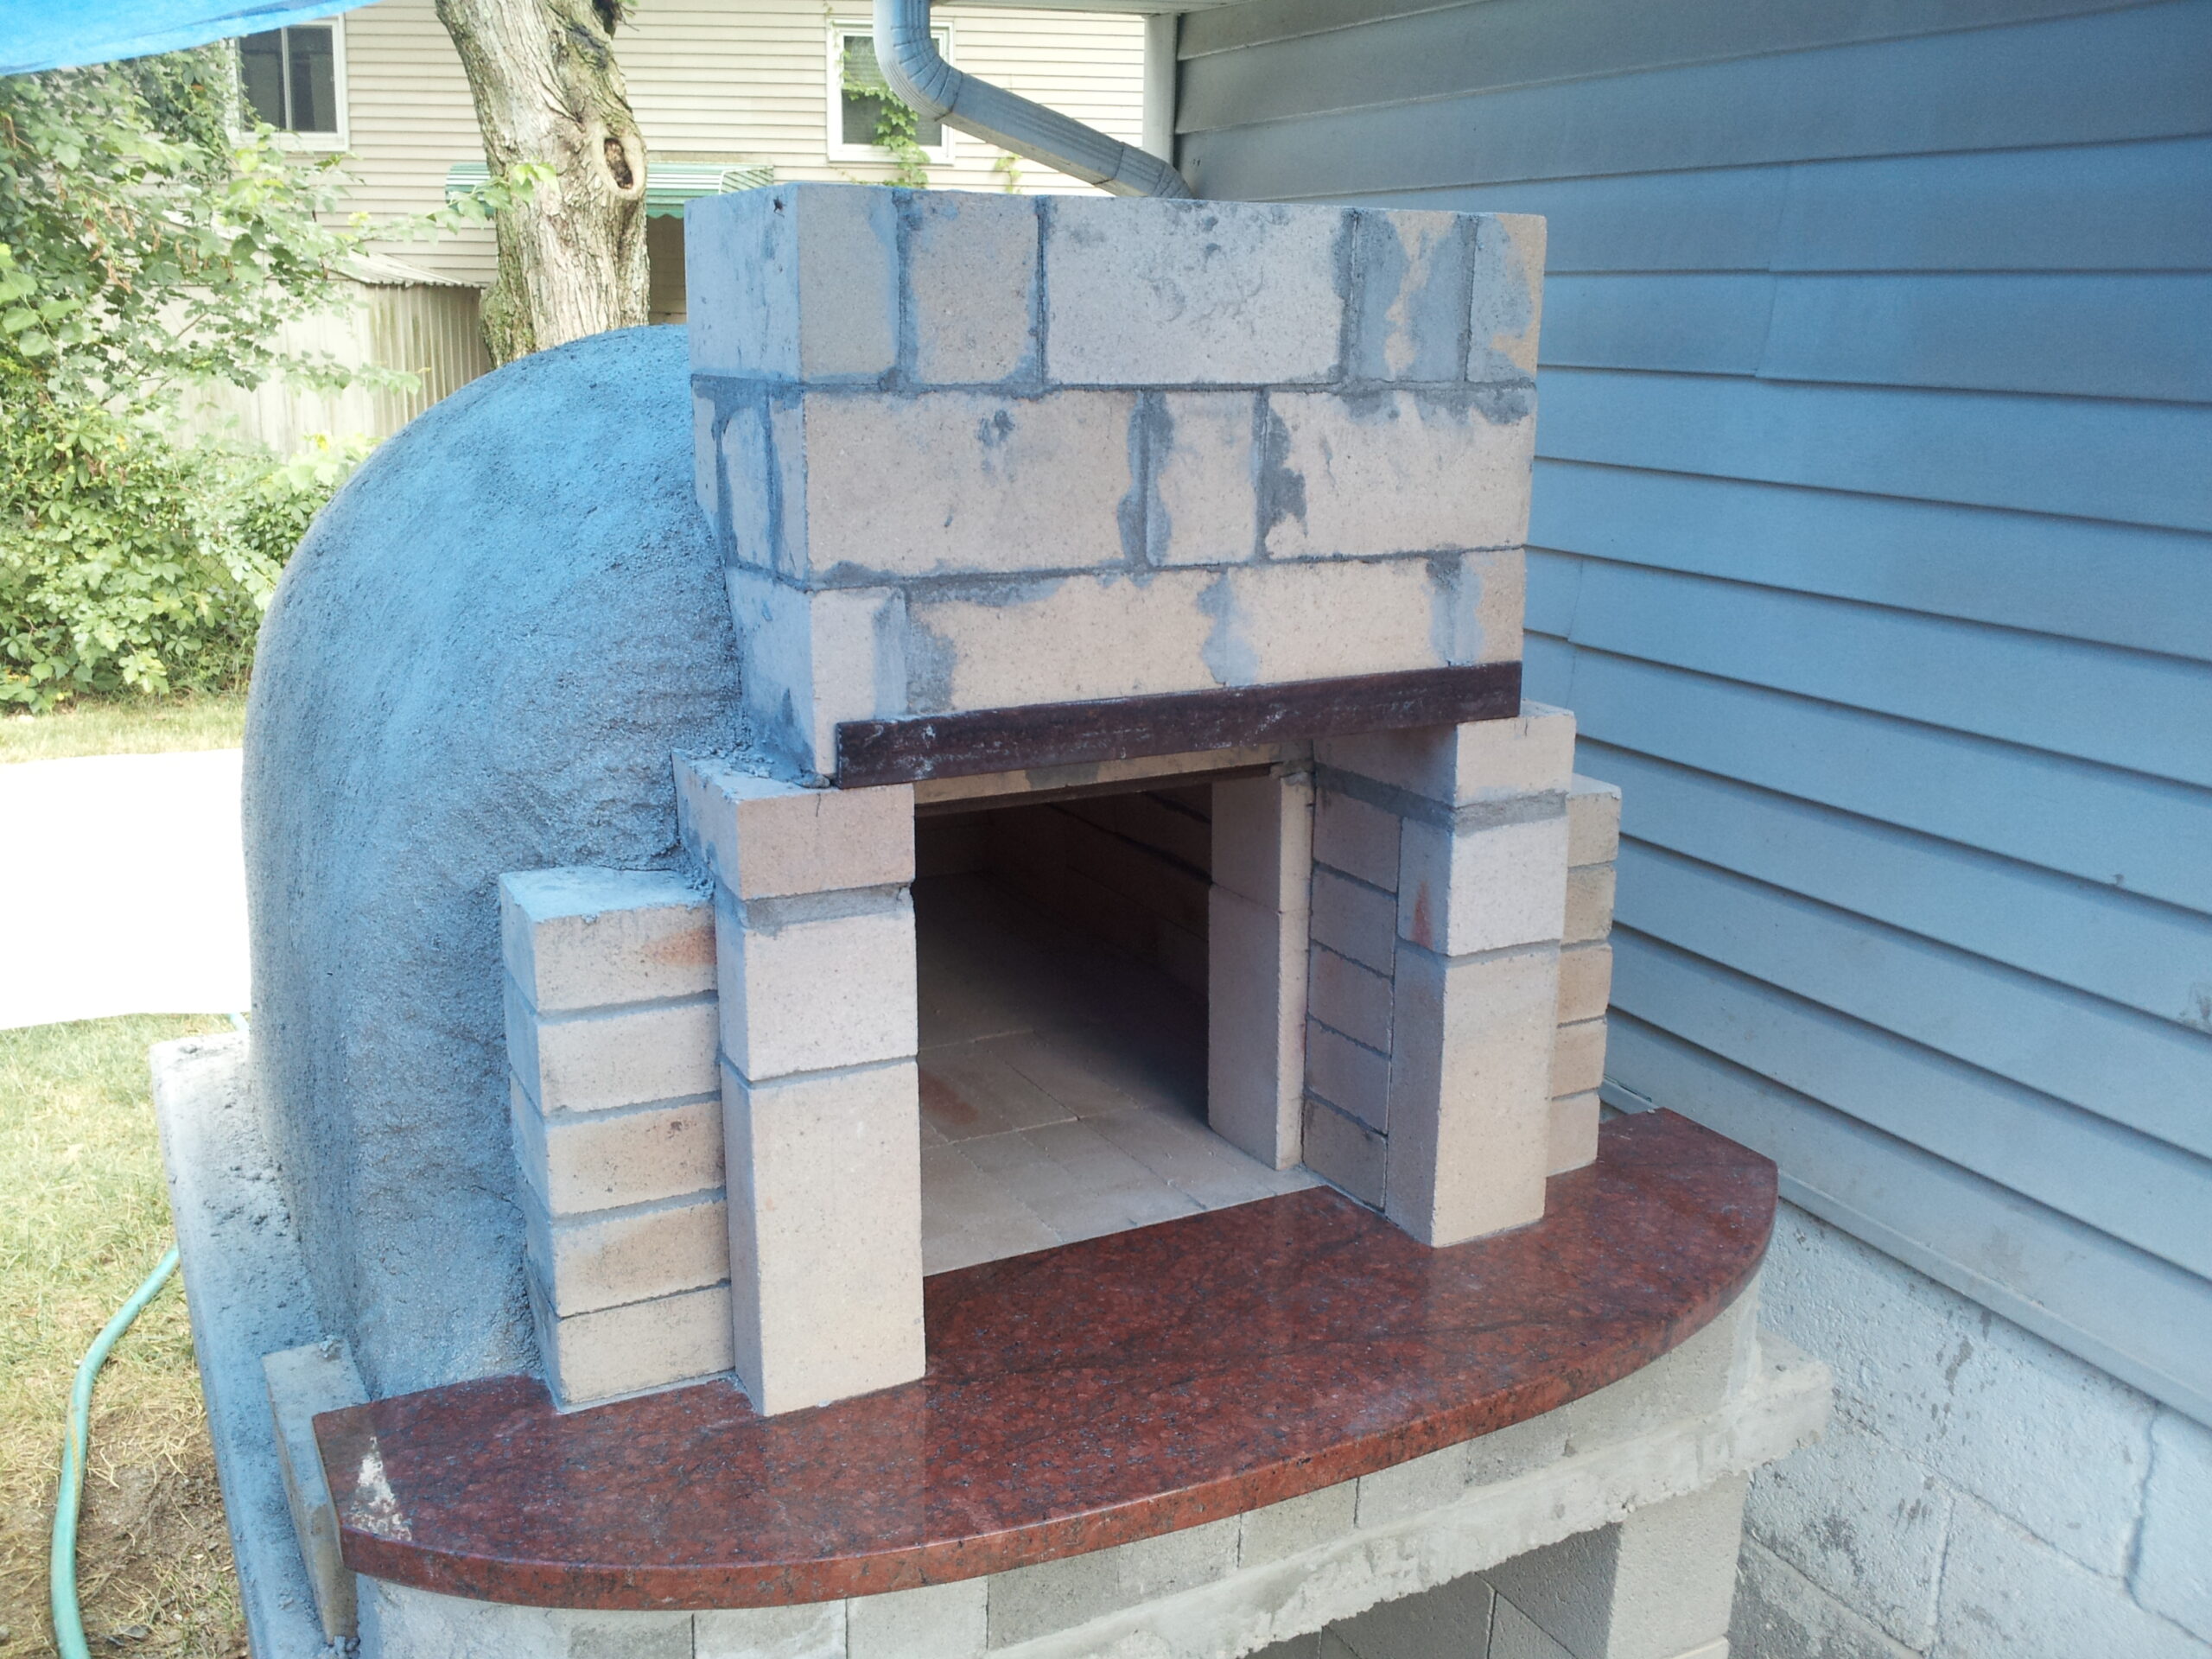 Building The Oven chimney